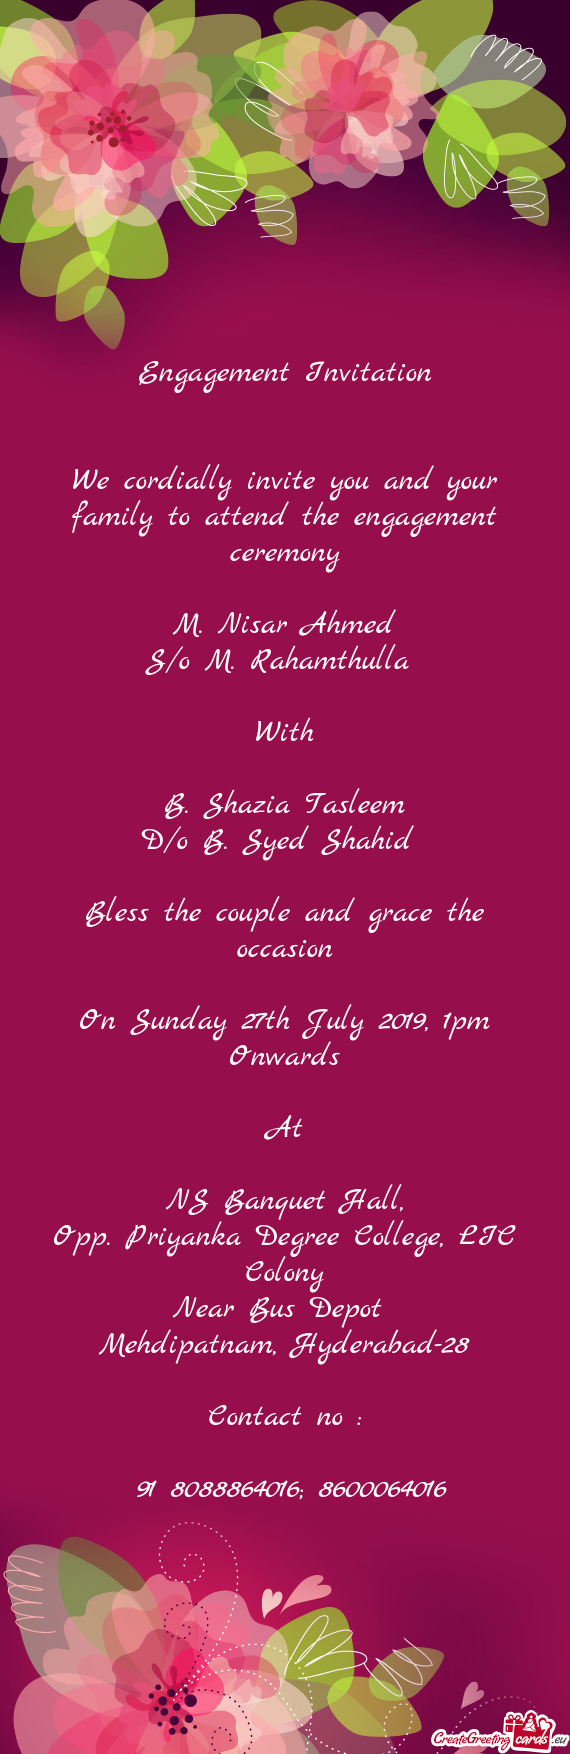 We cordially invite you and your family to attend the engagement ceremony